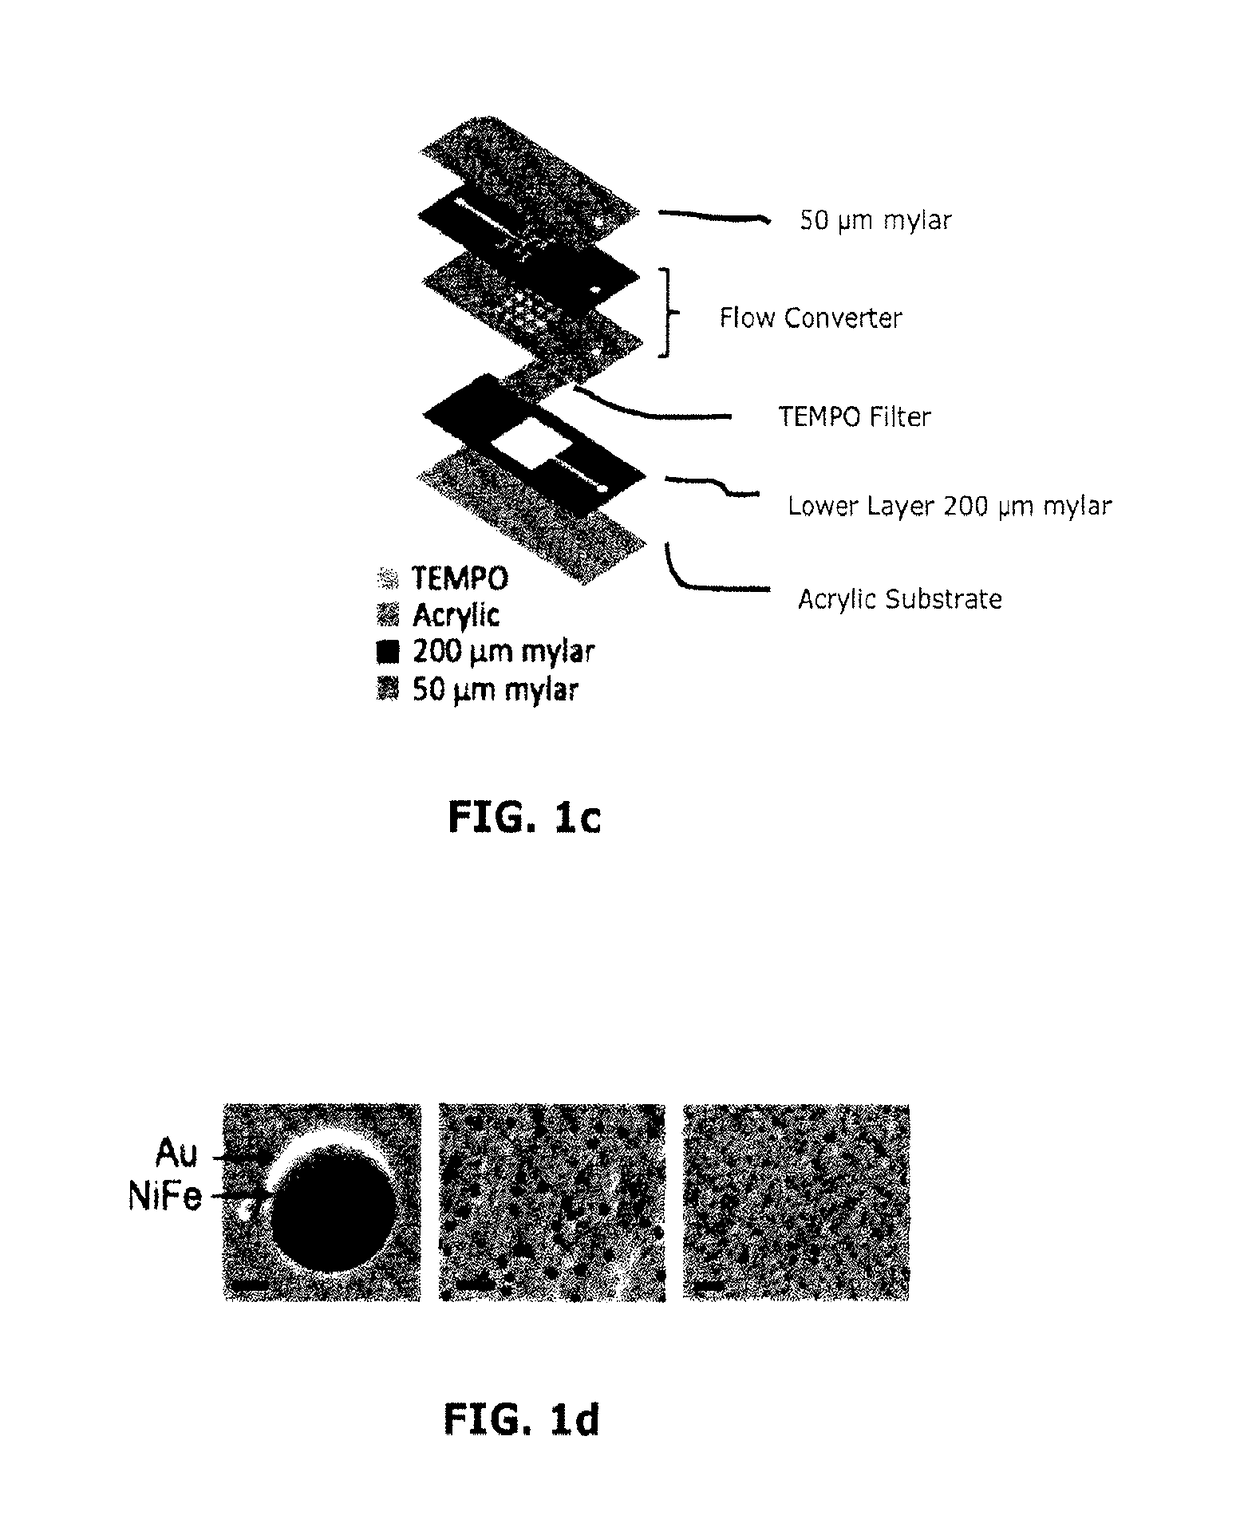 Magnetic Separation Filters and Microfluidic Devices Using Magnetic Separation Filters